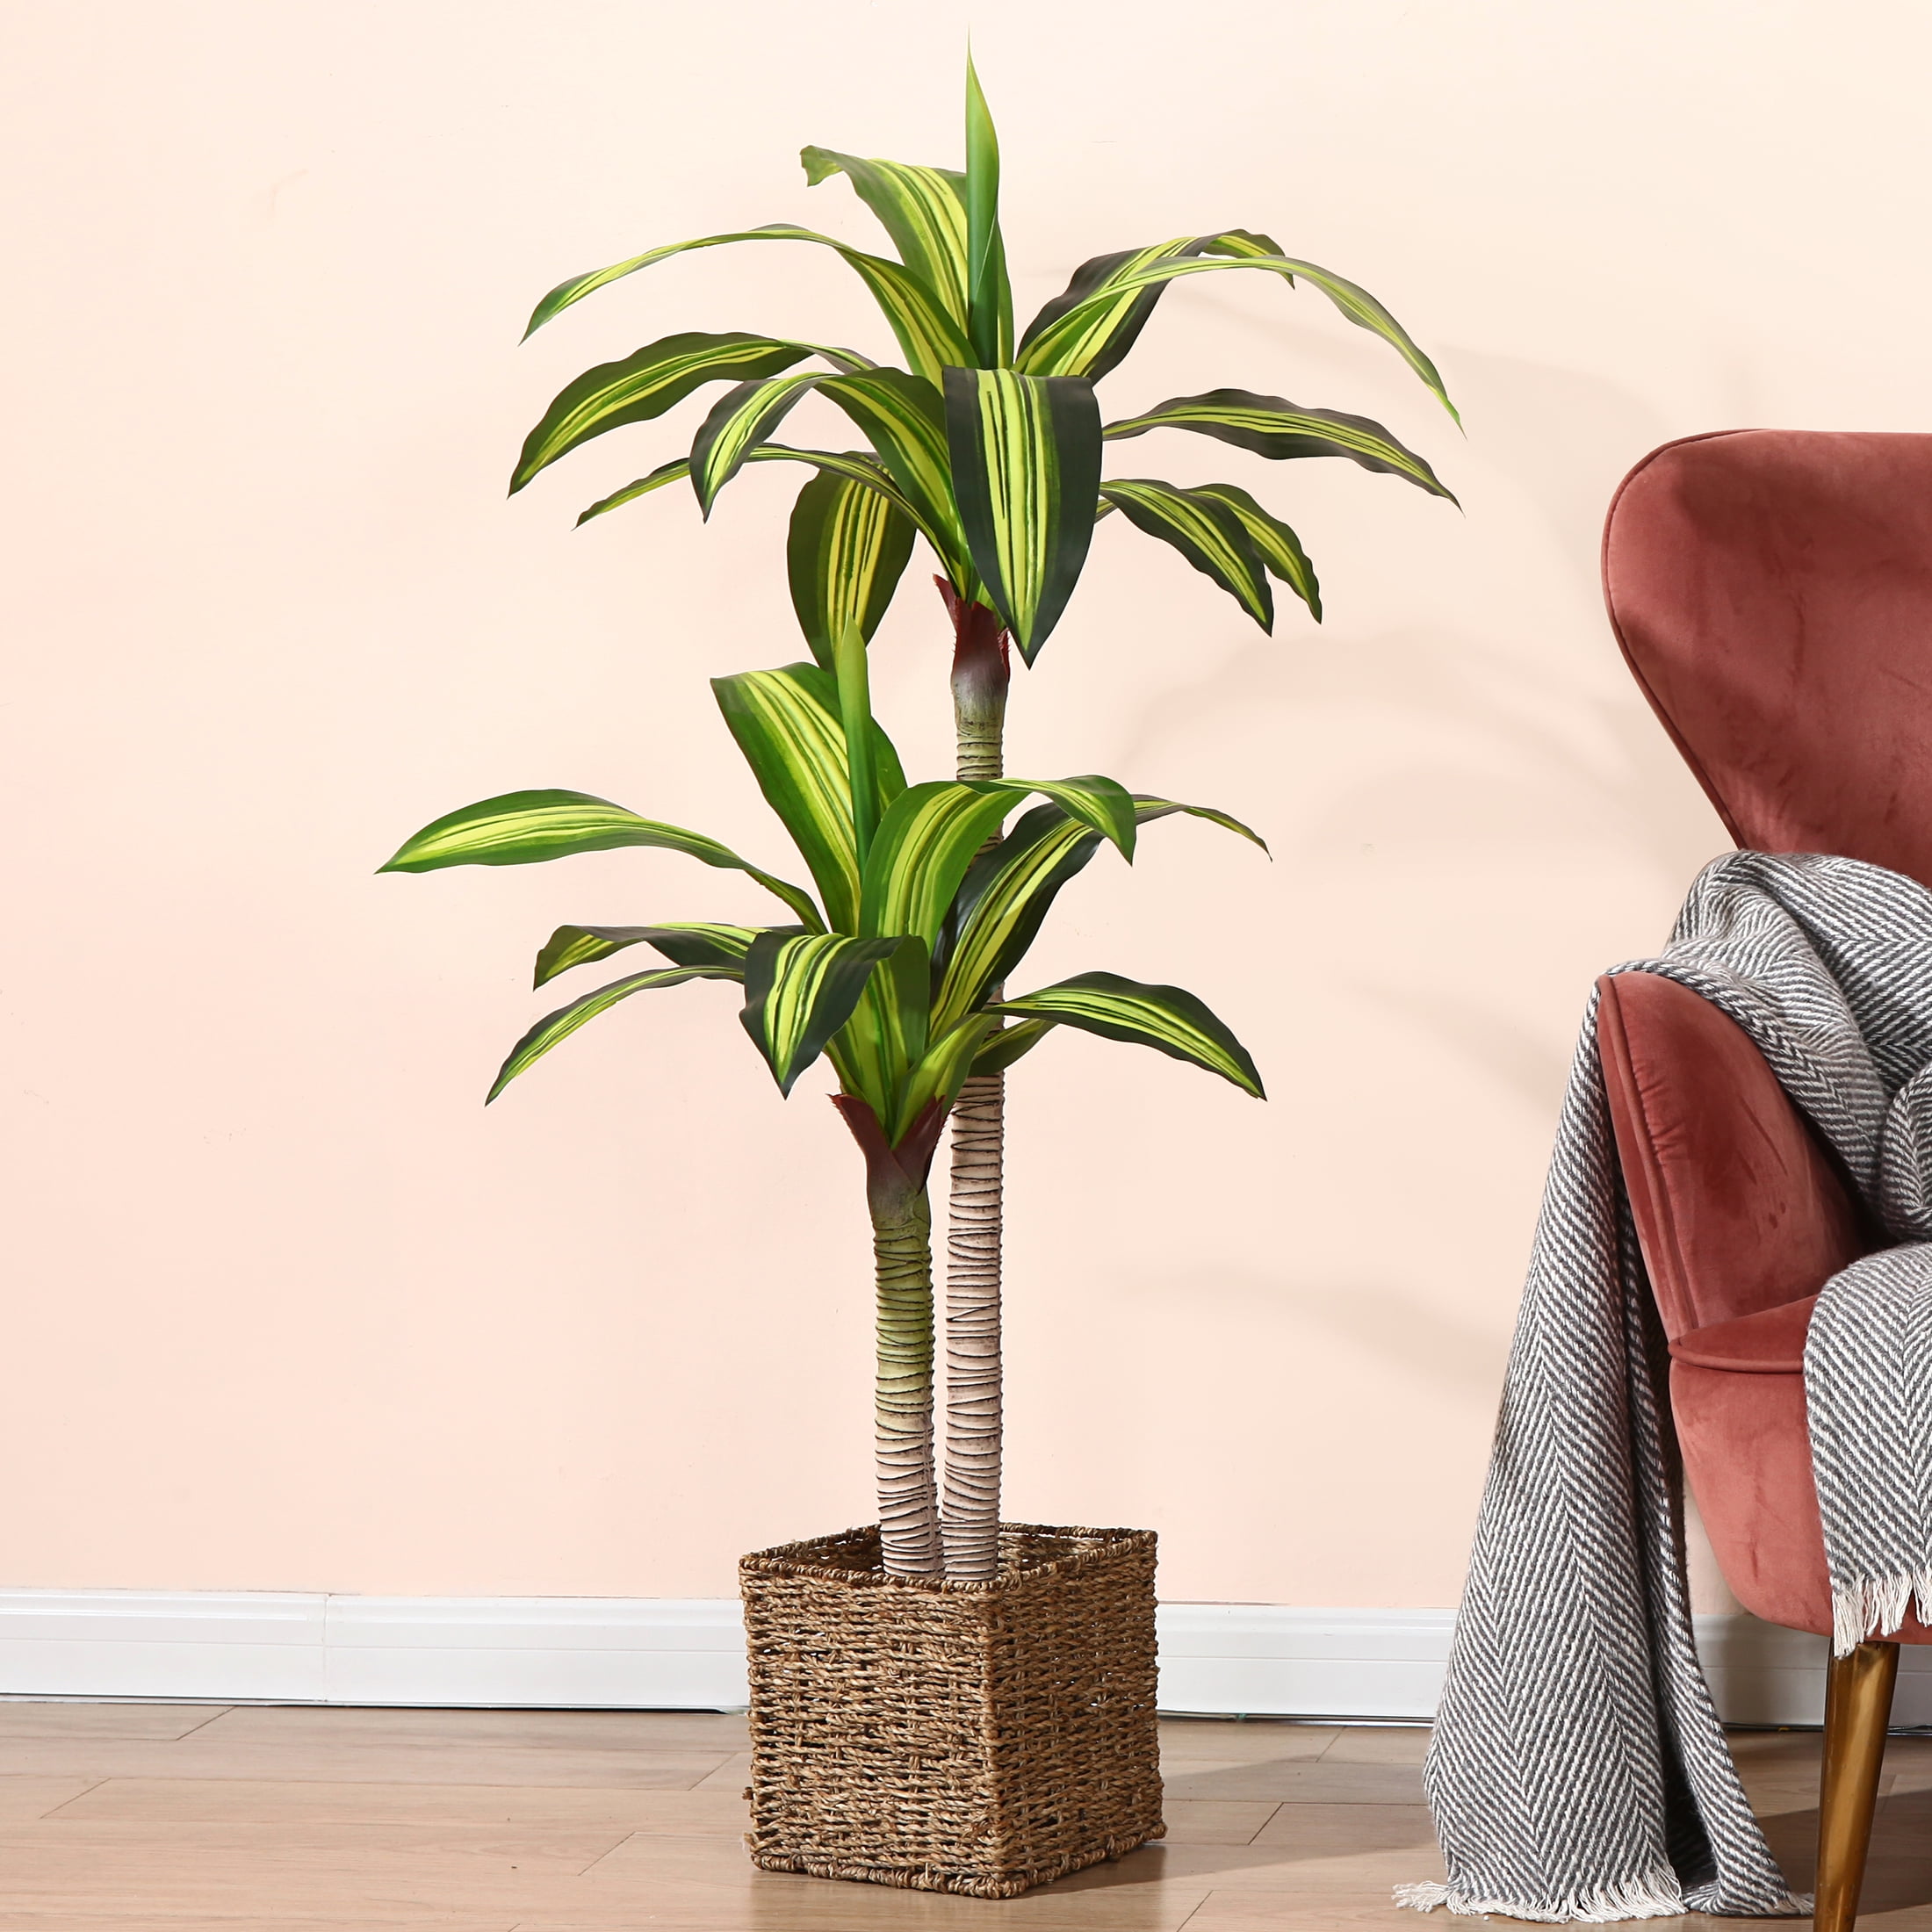 Top 11 Small Indoor Plants for Home Decor